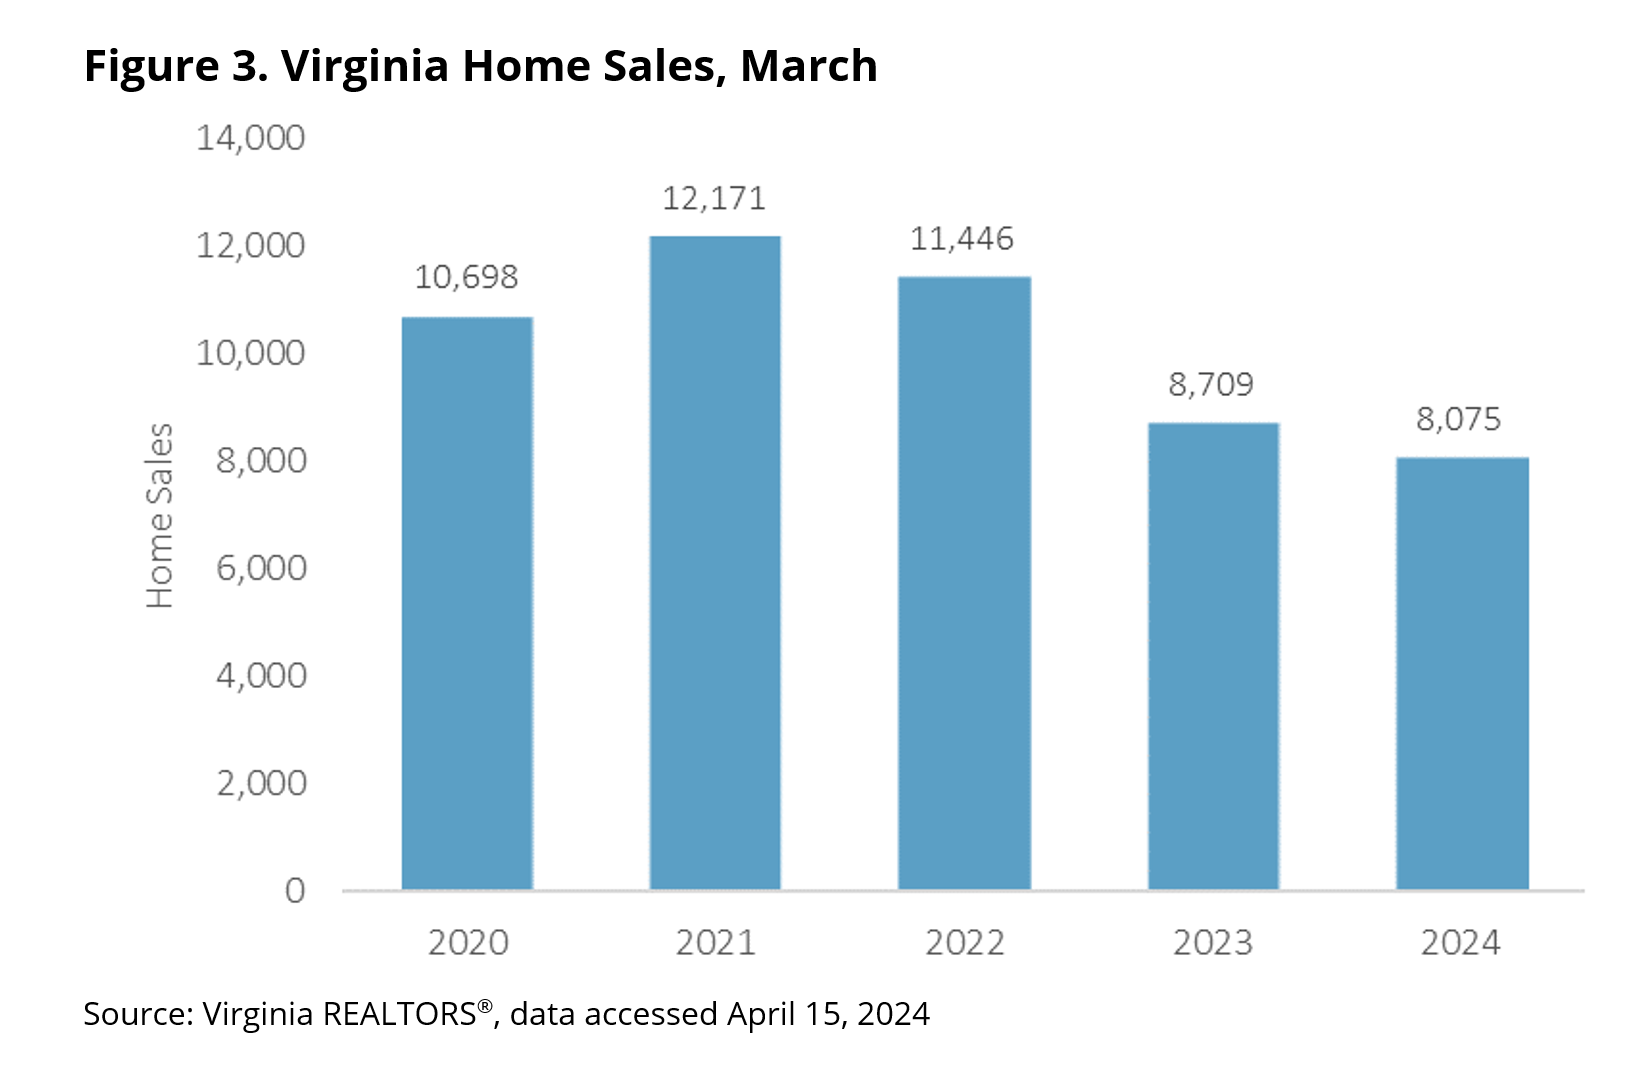 Climbing Prices and Mortgage Rates Dampen Virginia's Spring Housing Market